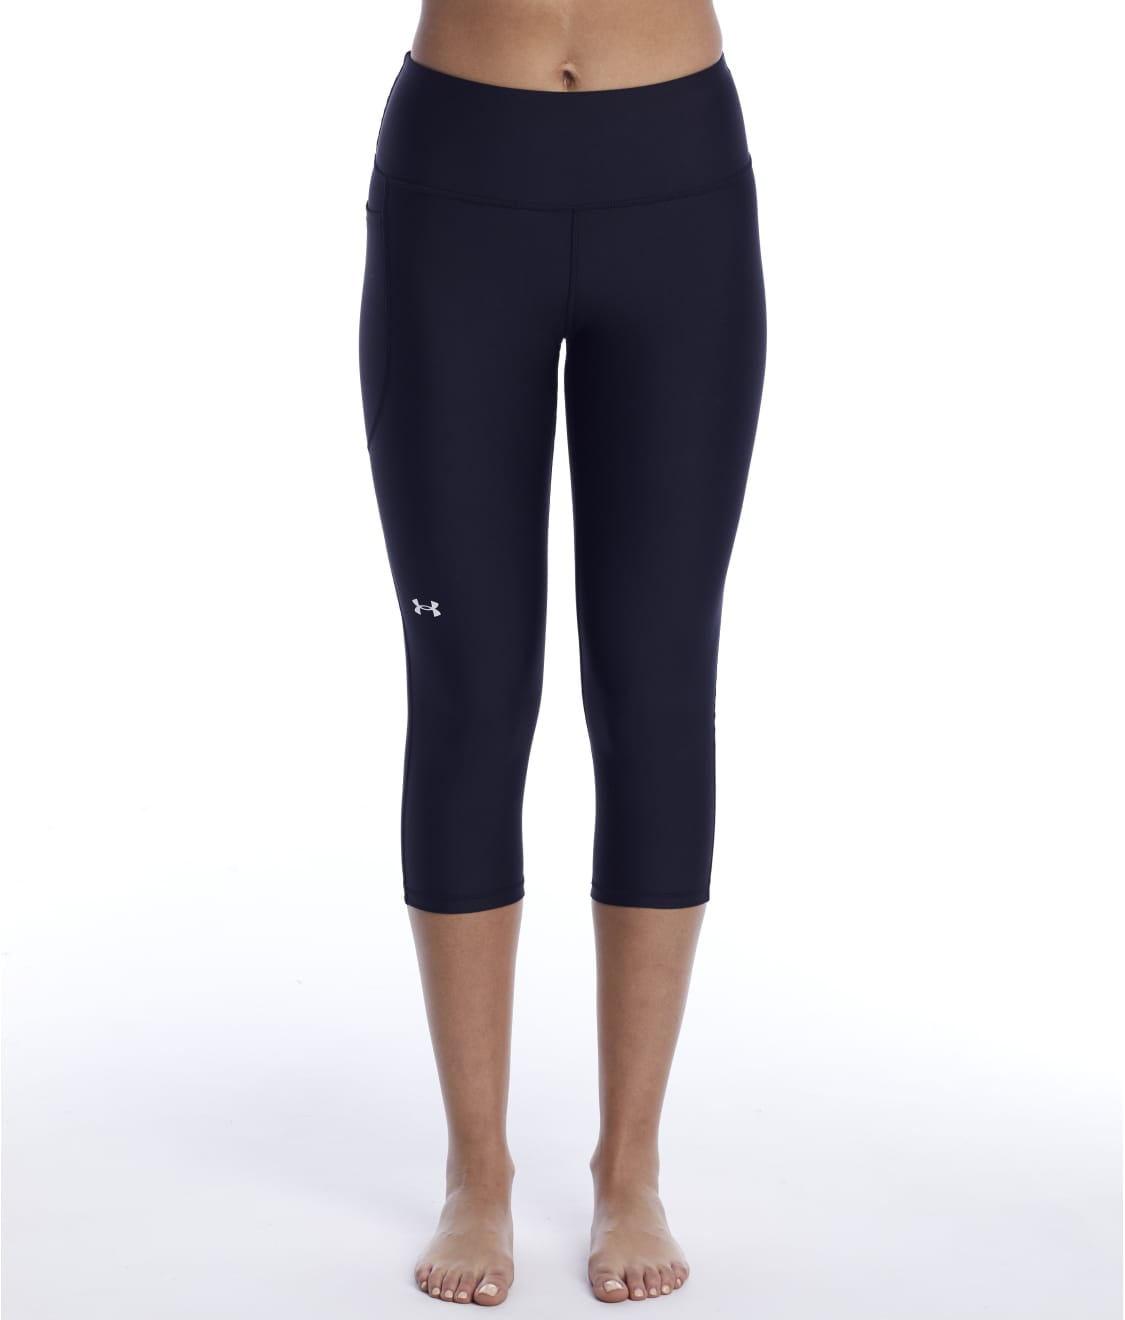 Under Armour Women's Heatgear High Rise Cropped Leggings Black Size Small 